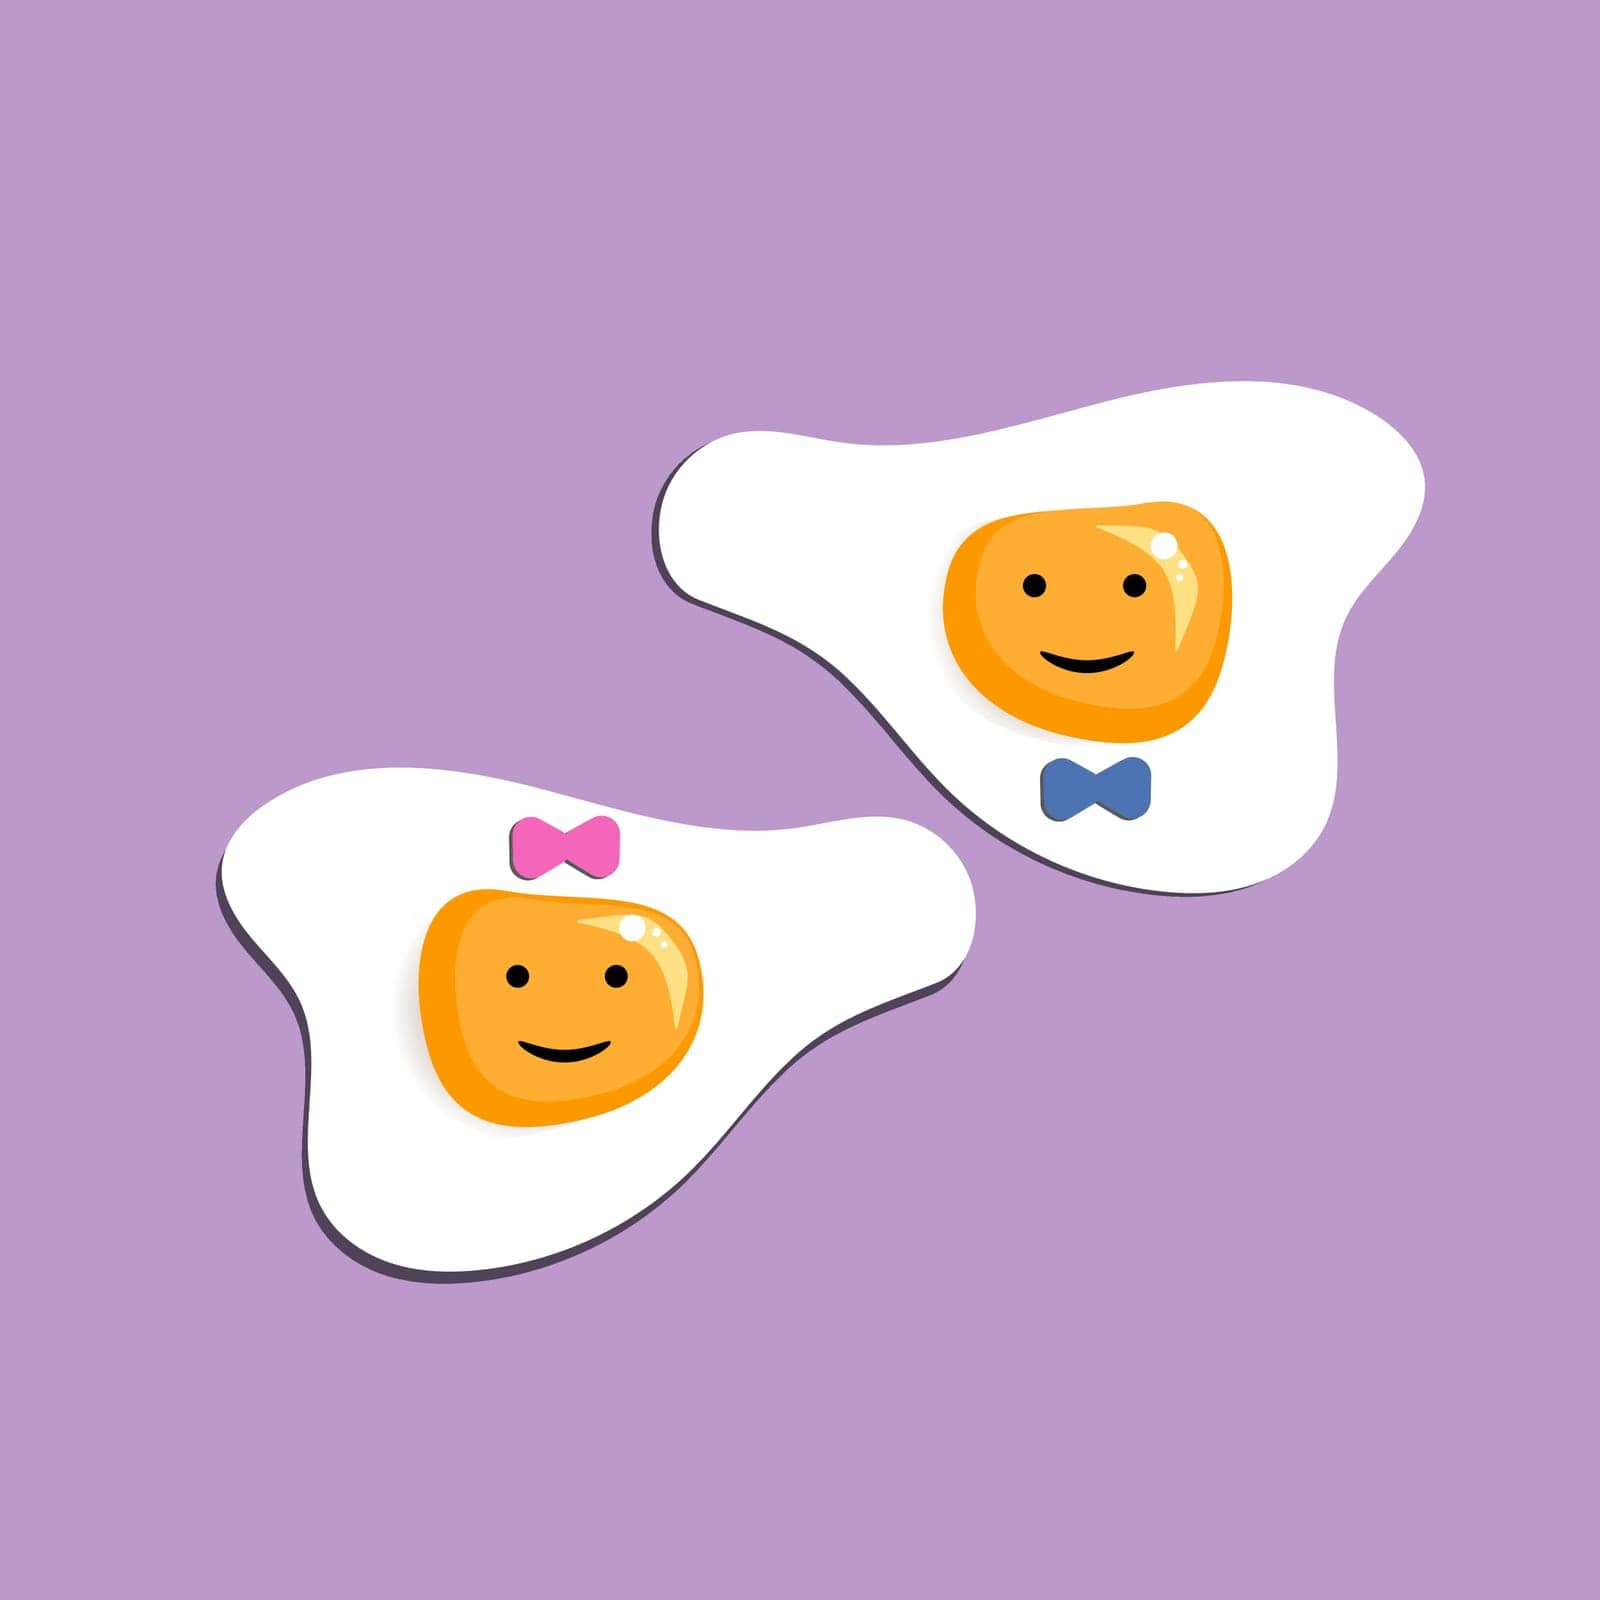 Funny cute fried eggs emoticon face icon like a boy and girl with a bow tie and bow isolated on the purple background. Paper cut-out vector illustration. by okskukuruza